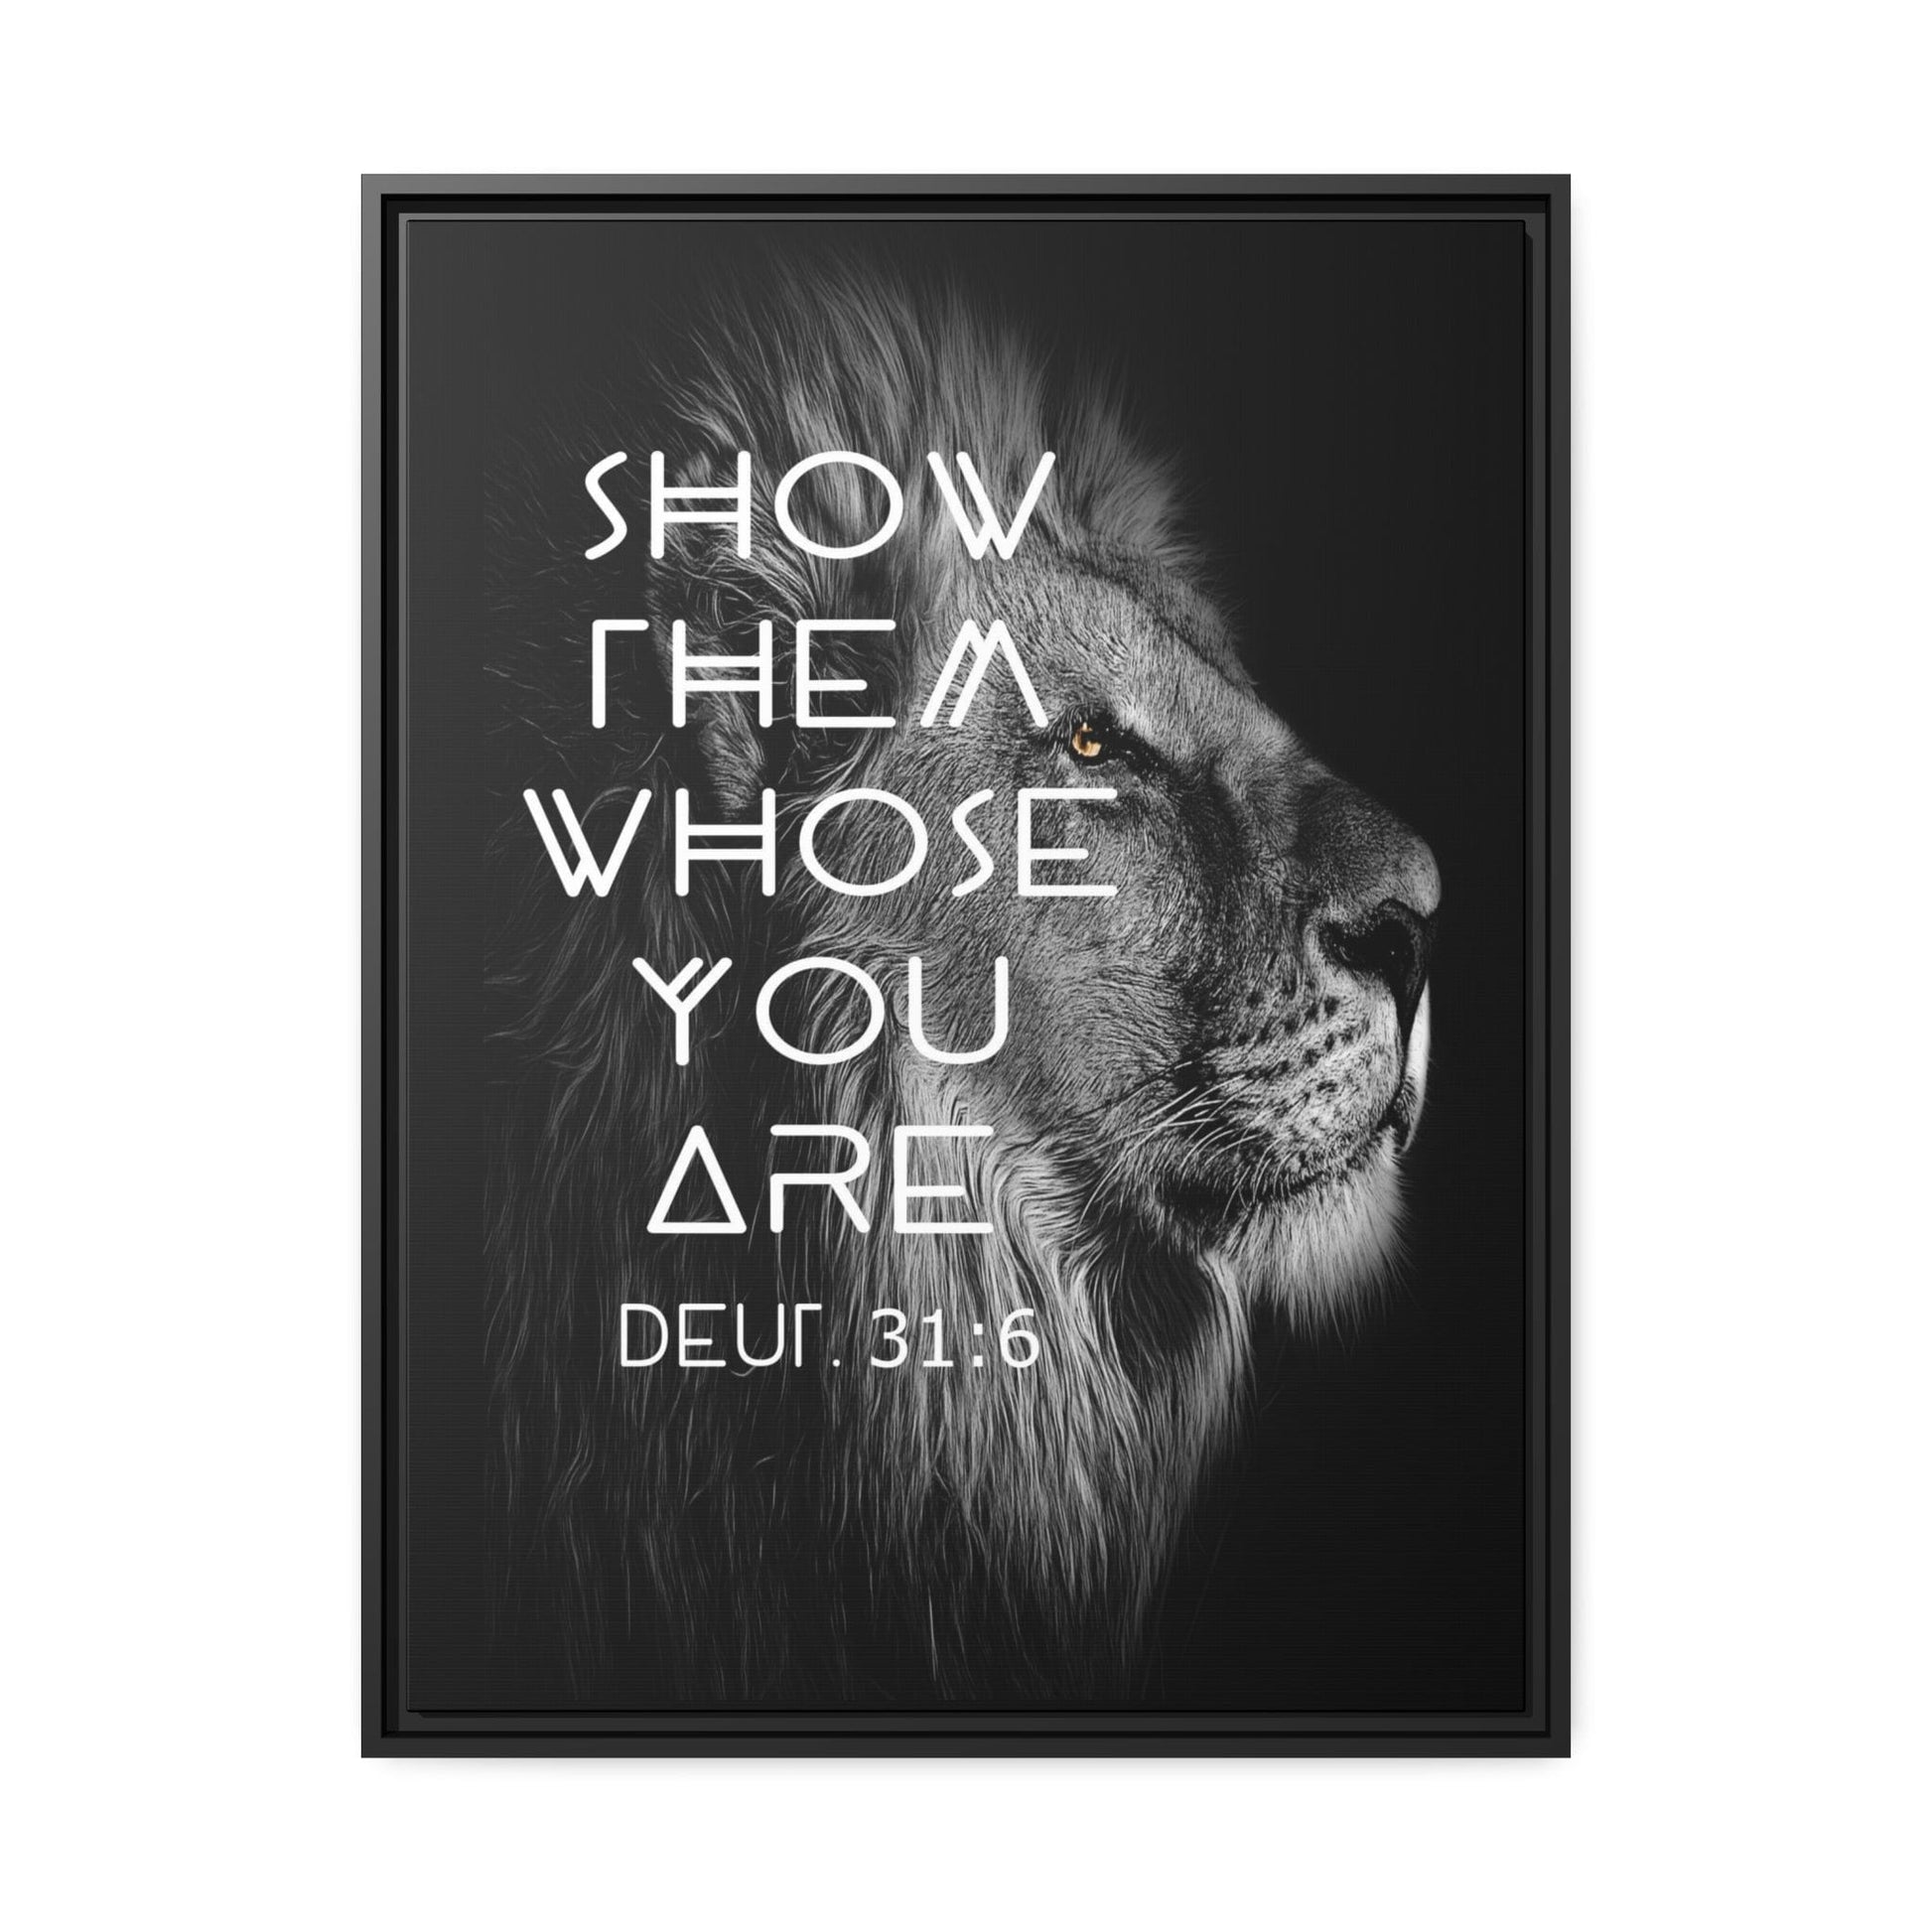 Printify Canvas 24" x 32" (Vertical) / Black / 1.25" Show Them Whose You Are - Deuteronomy 31:6 Christian Canvas Wall Art